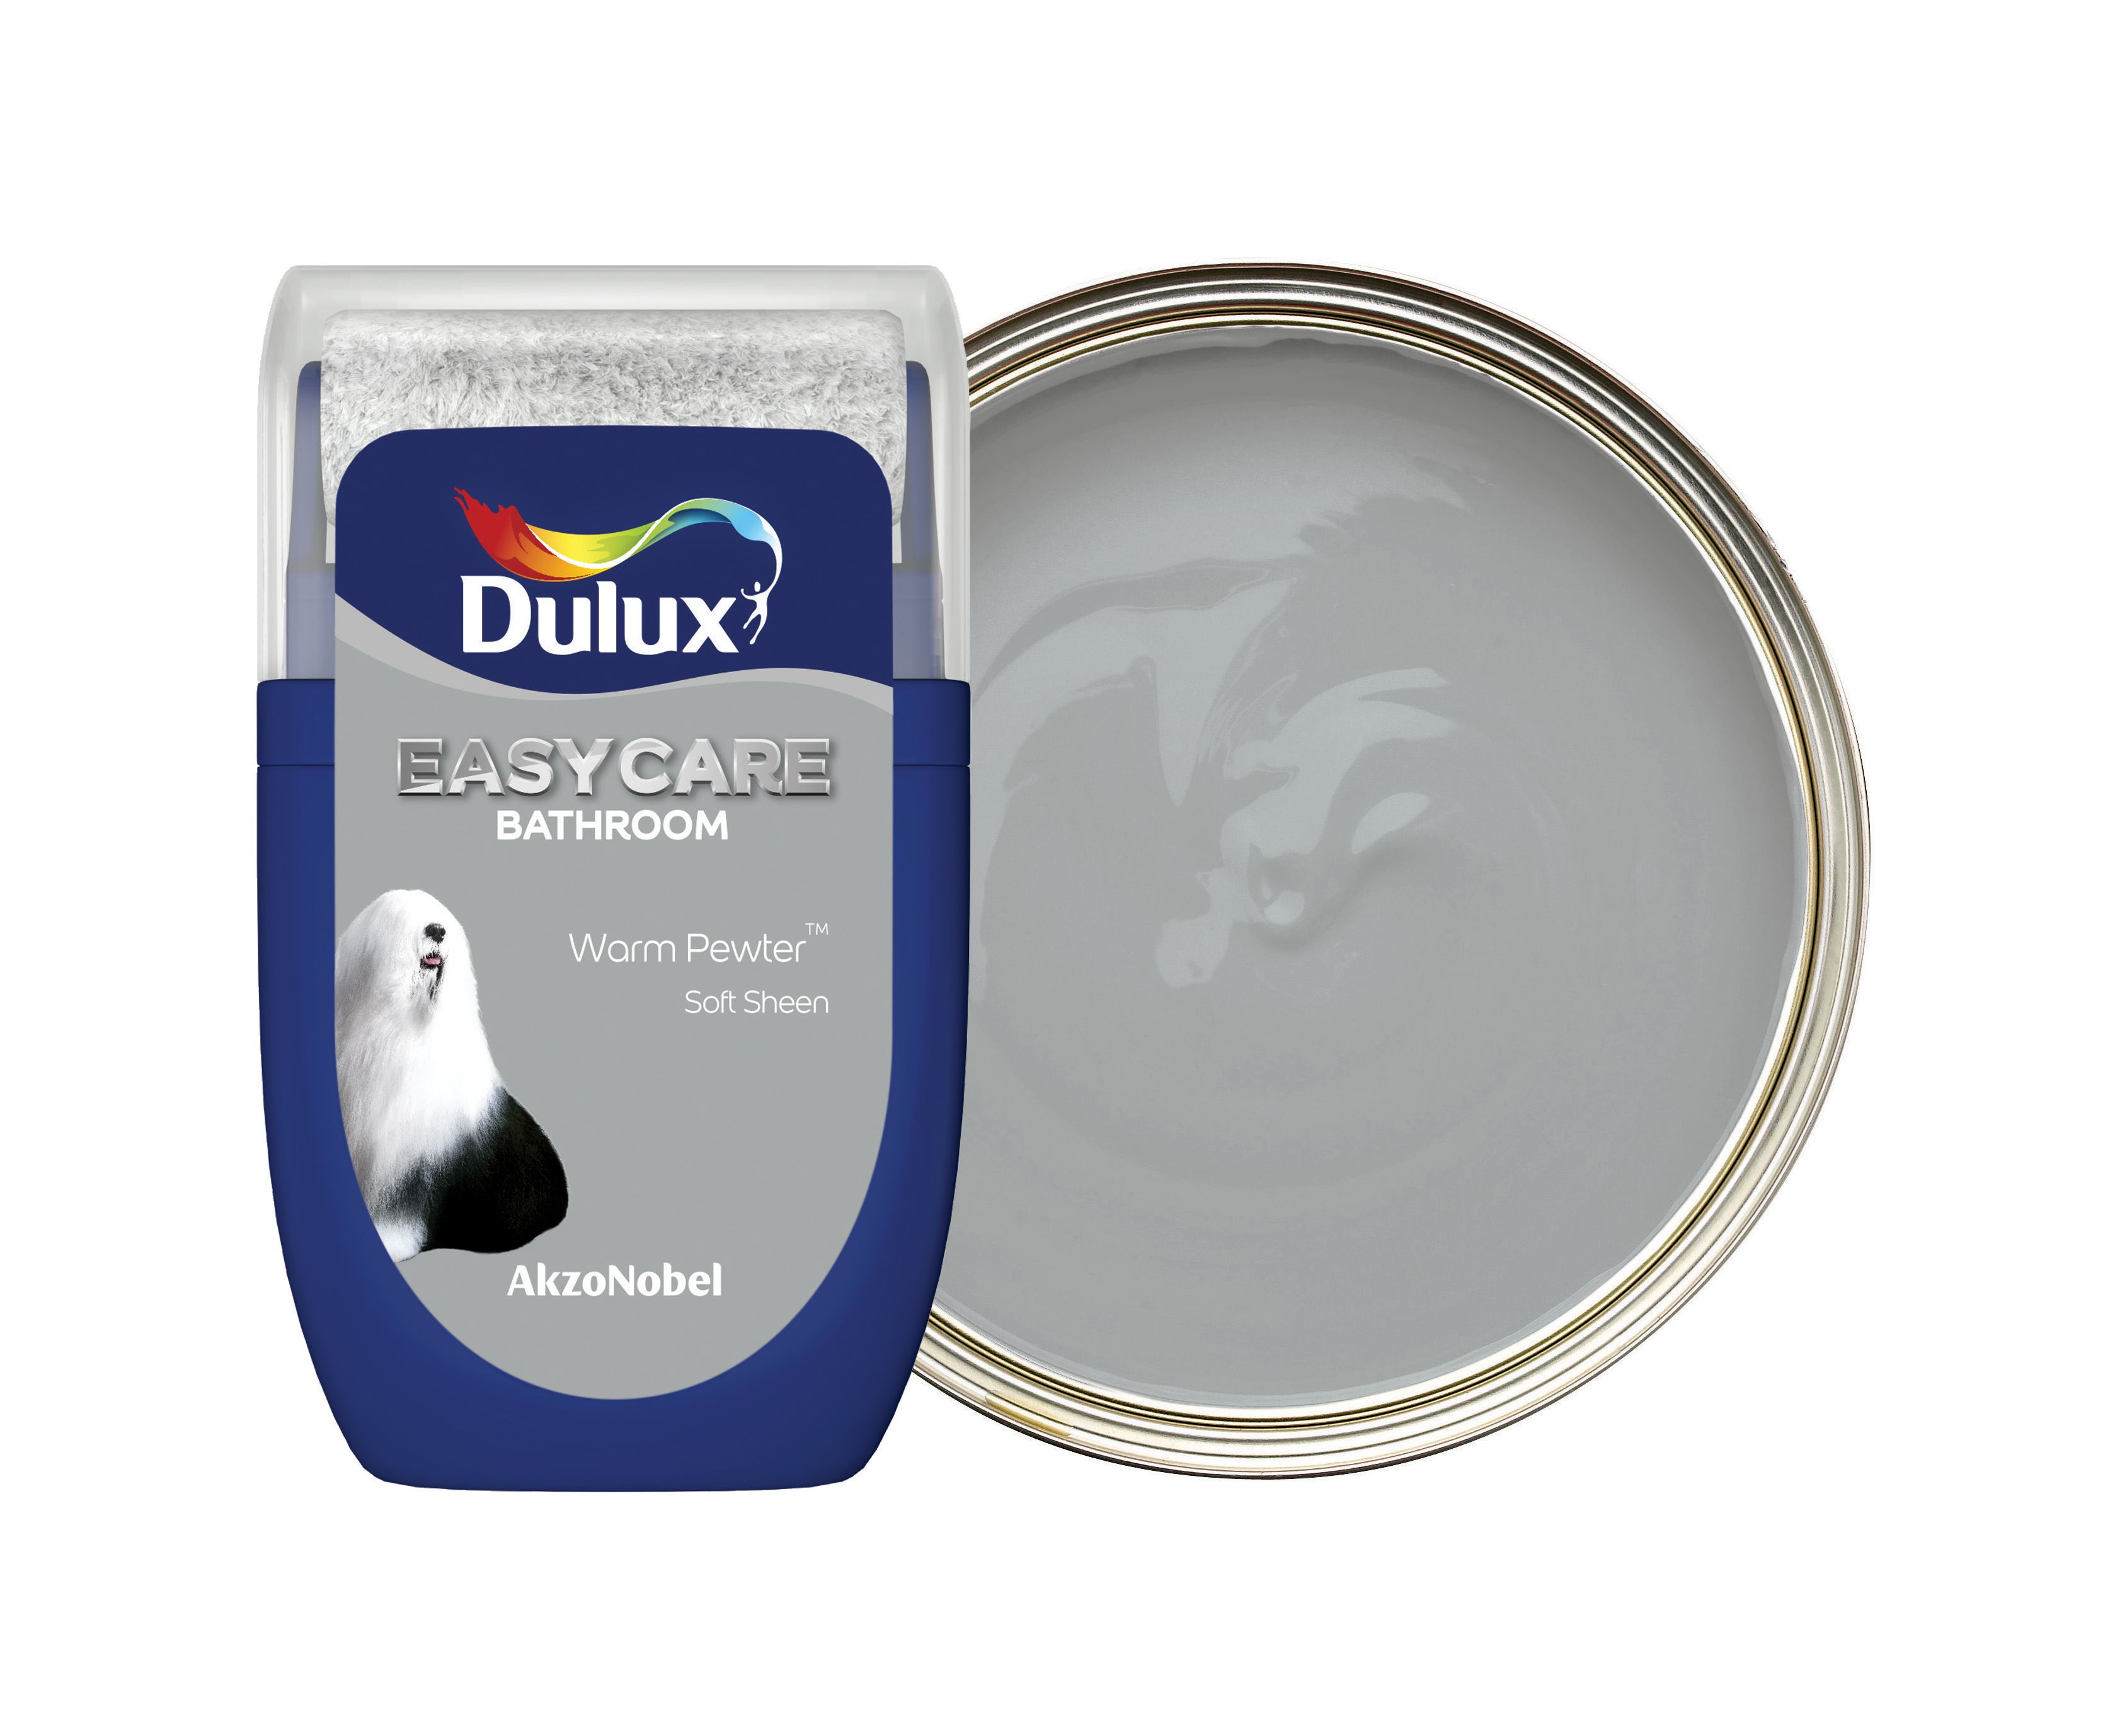 Image of Dulux Easycare Bathroom Paint - Warm Pewter Tester Pot - 30ml